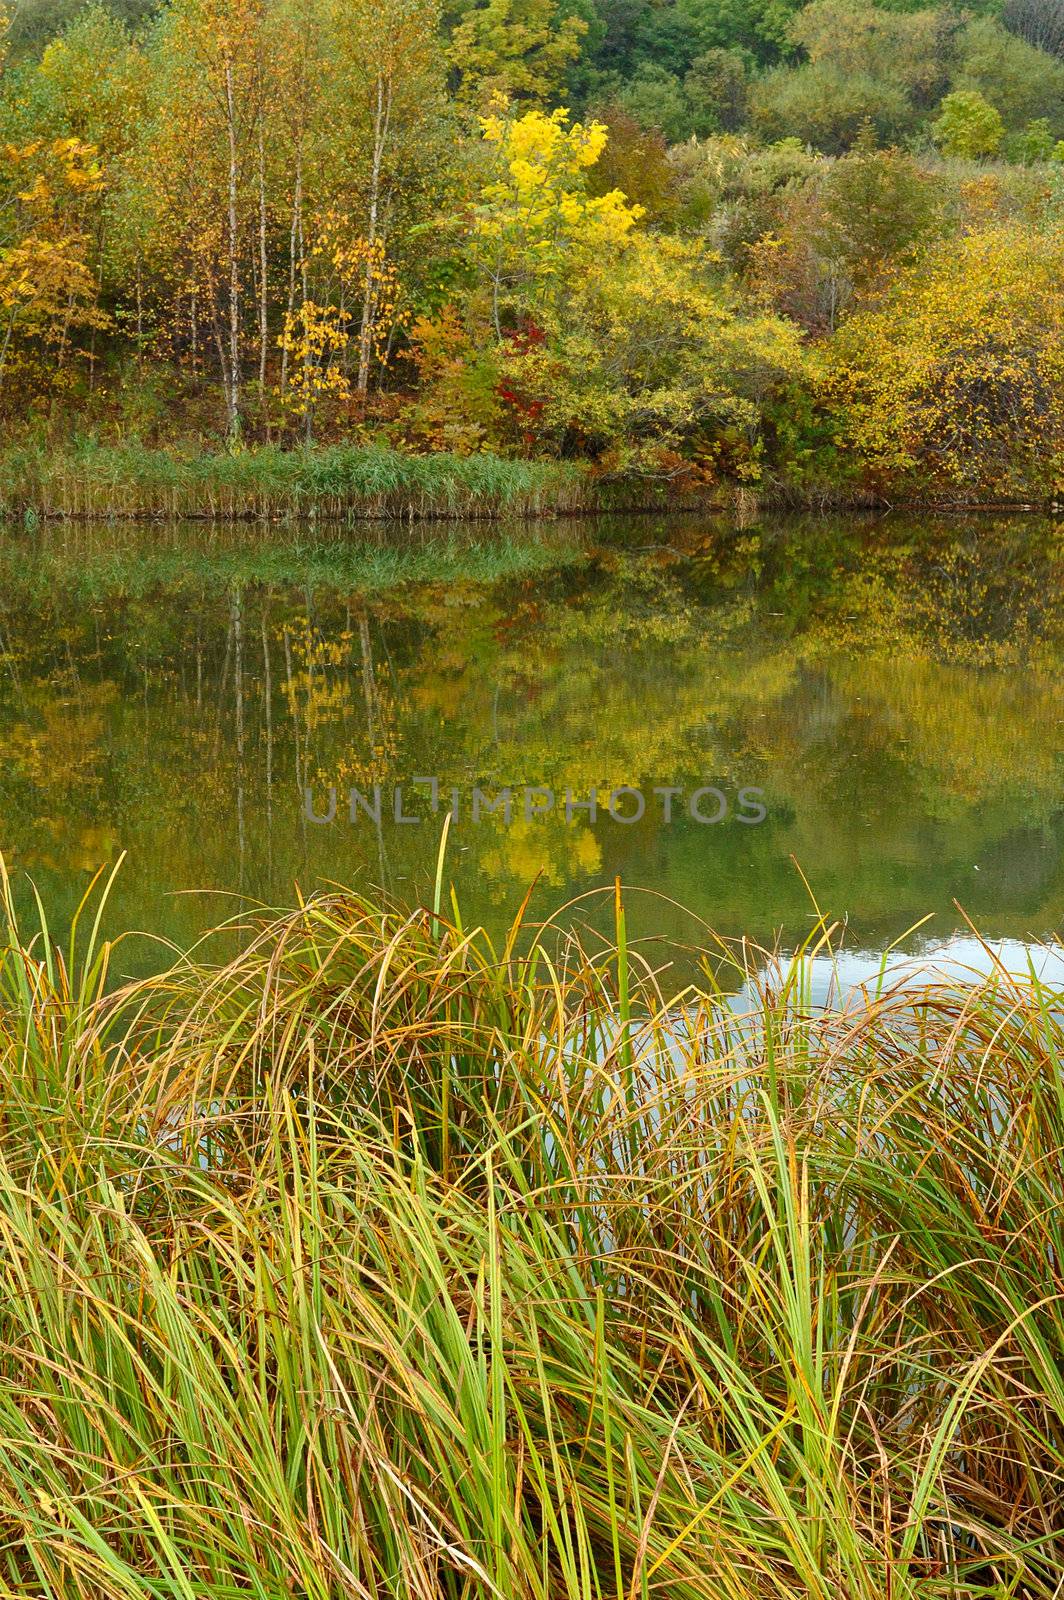 Autumn forest and lake scenery - bright nature landscape.